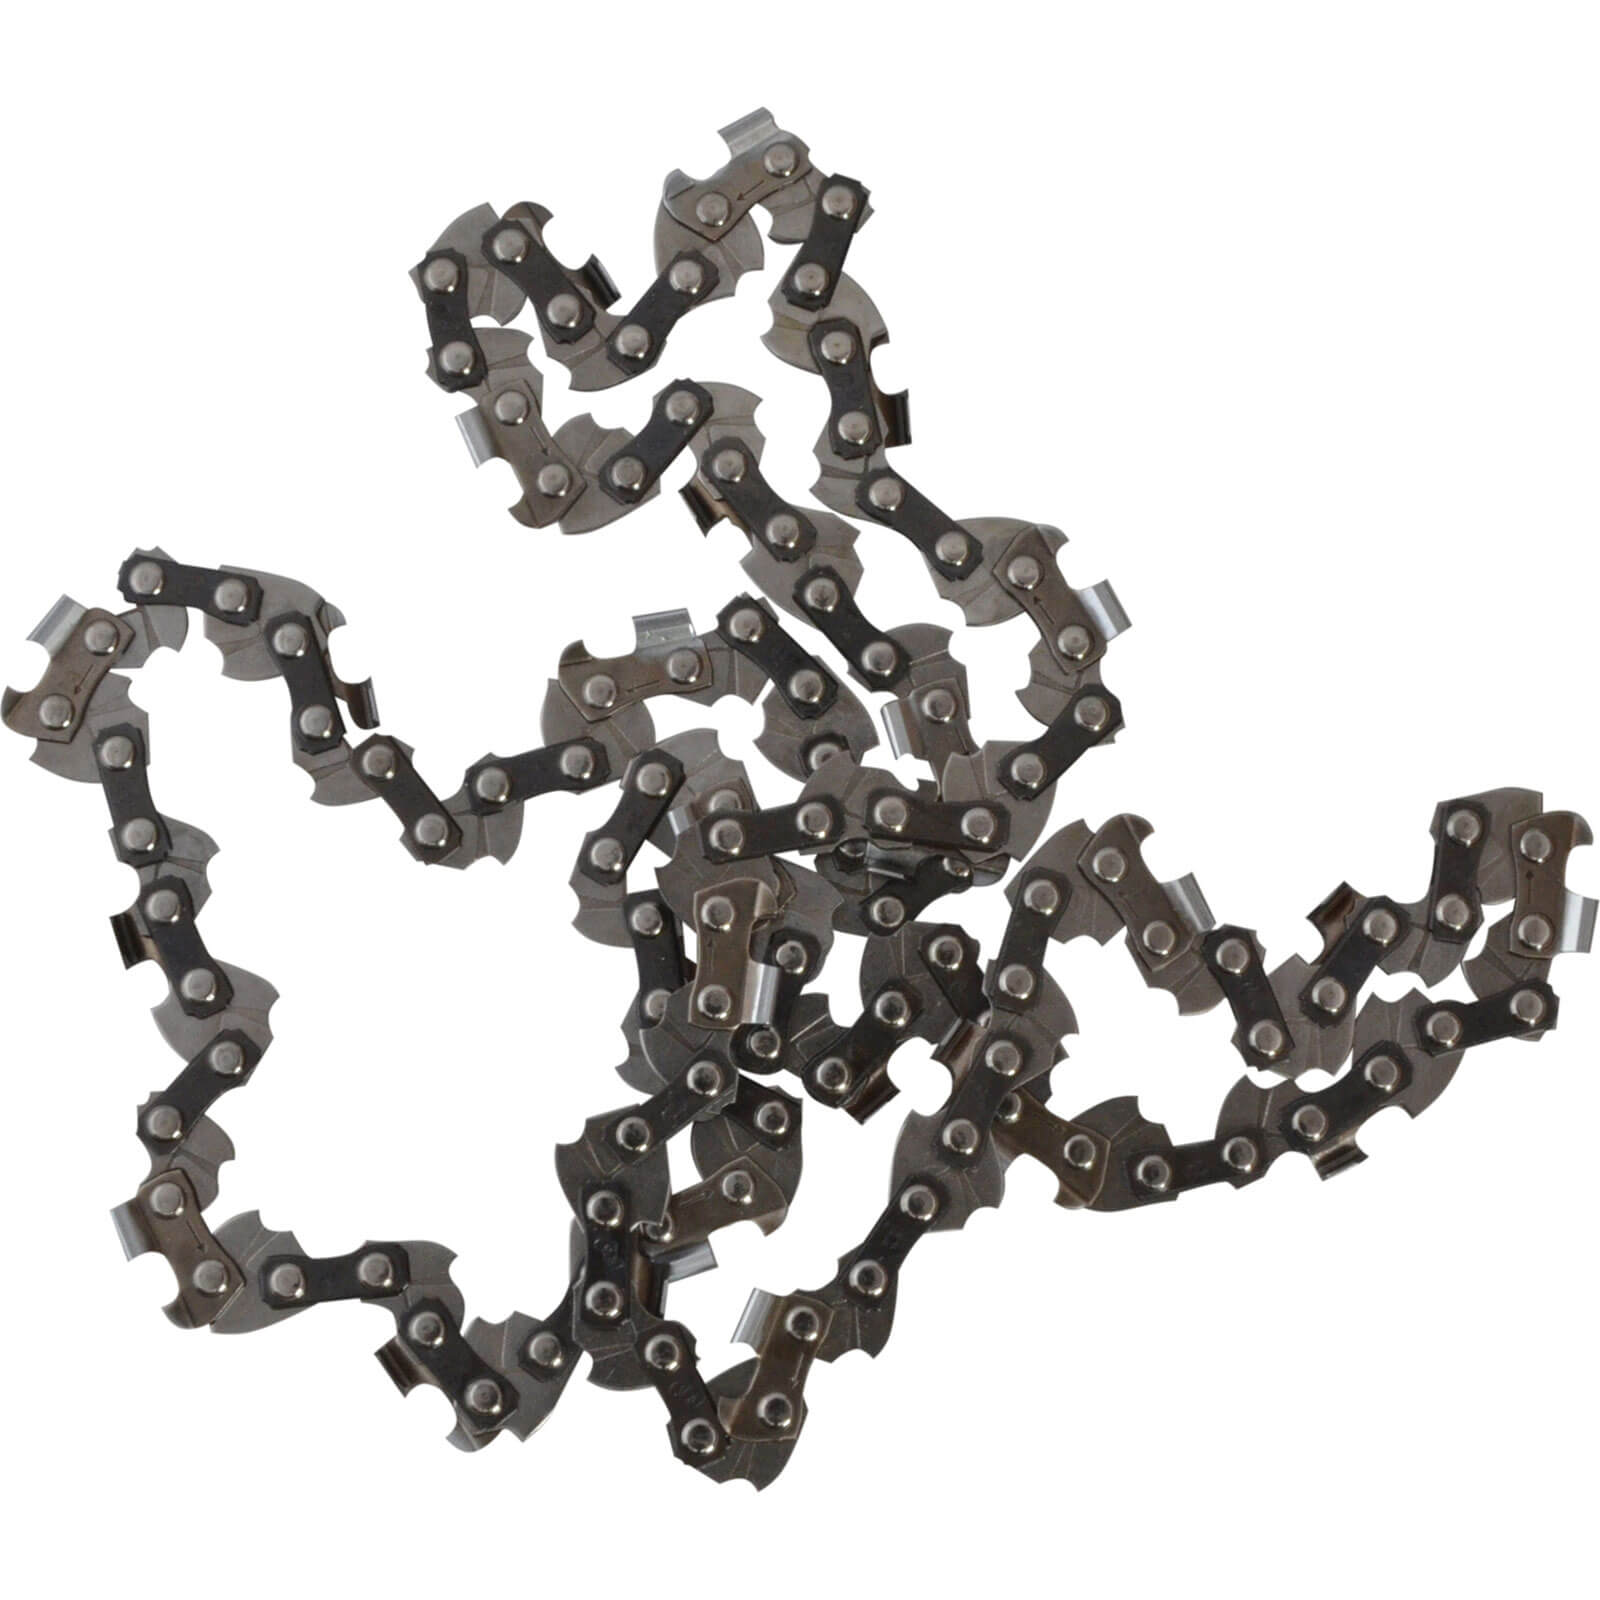 Image of ALM Chainsaw Chain 3/8" x 57 Links fits 400mm Bars for Bosch AKE Chainsaws 400mm